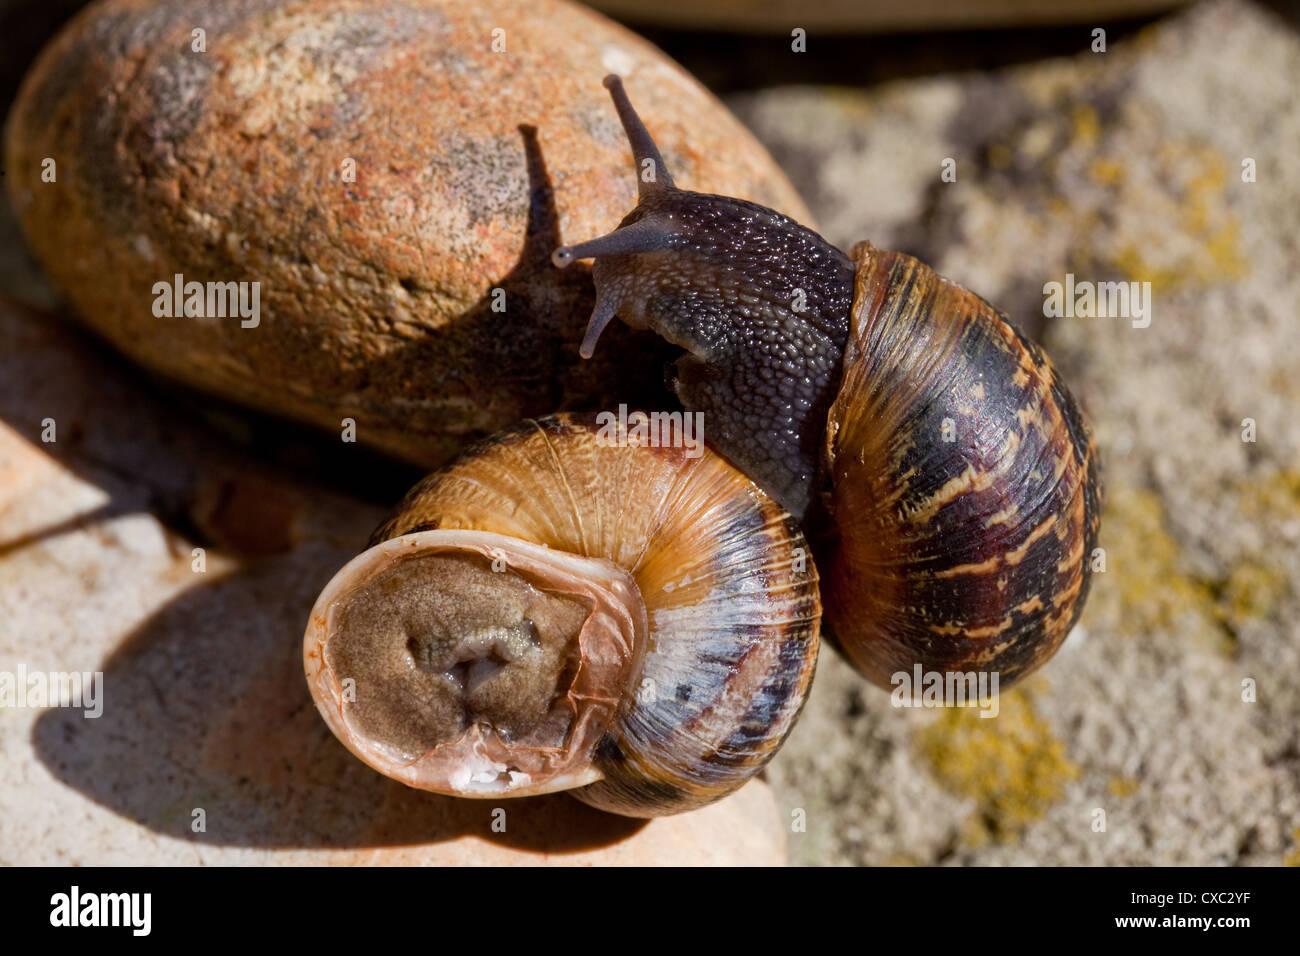 Garden Snails (Helix aspersa). One animal clambering over another onto a stone. Stock Photo